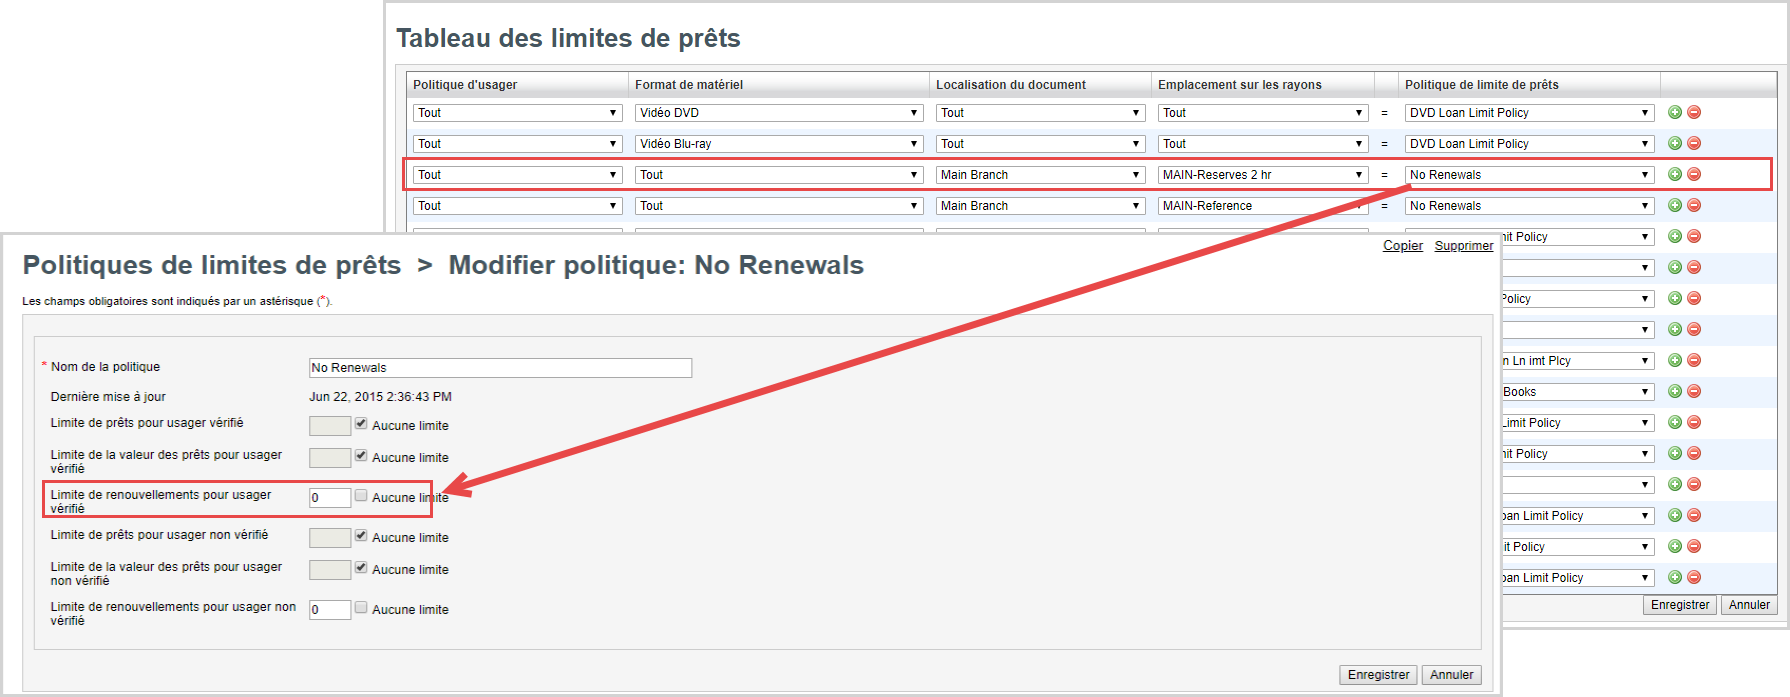 (ENGLISH COMMENT) Screenshot of the Loan Limit Matrix highlighting how to edit Loan Limit Policy